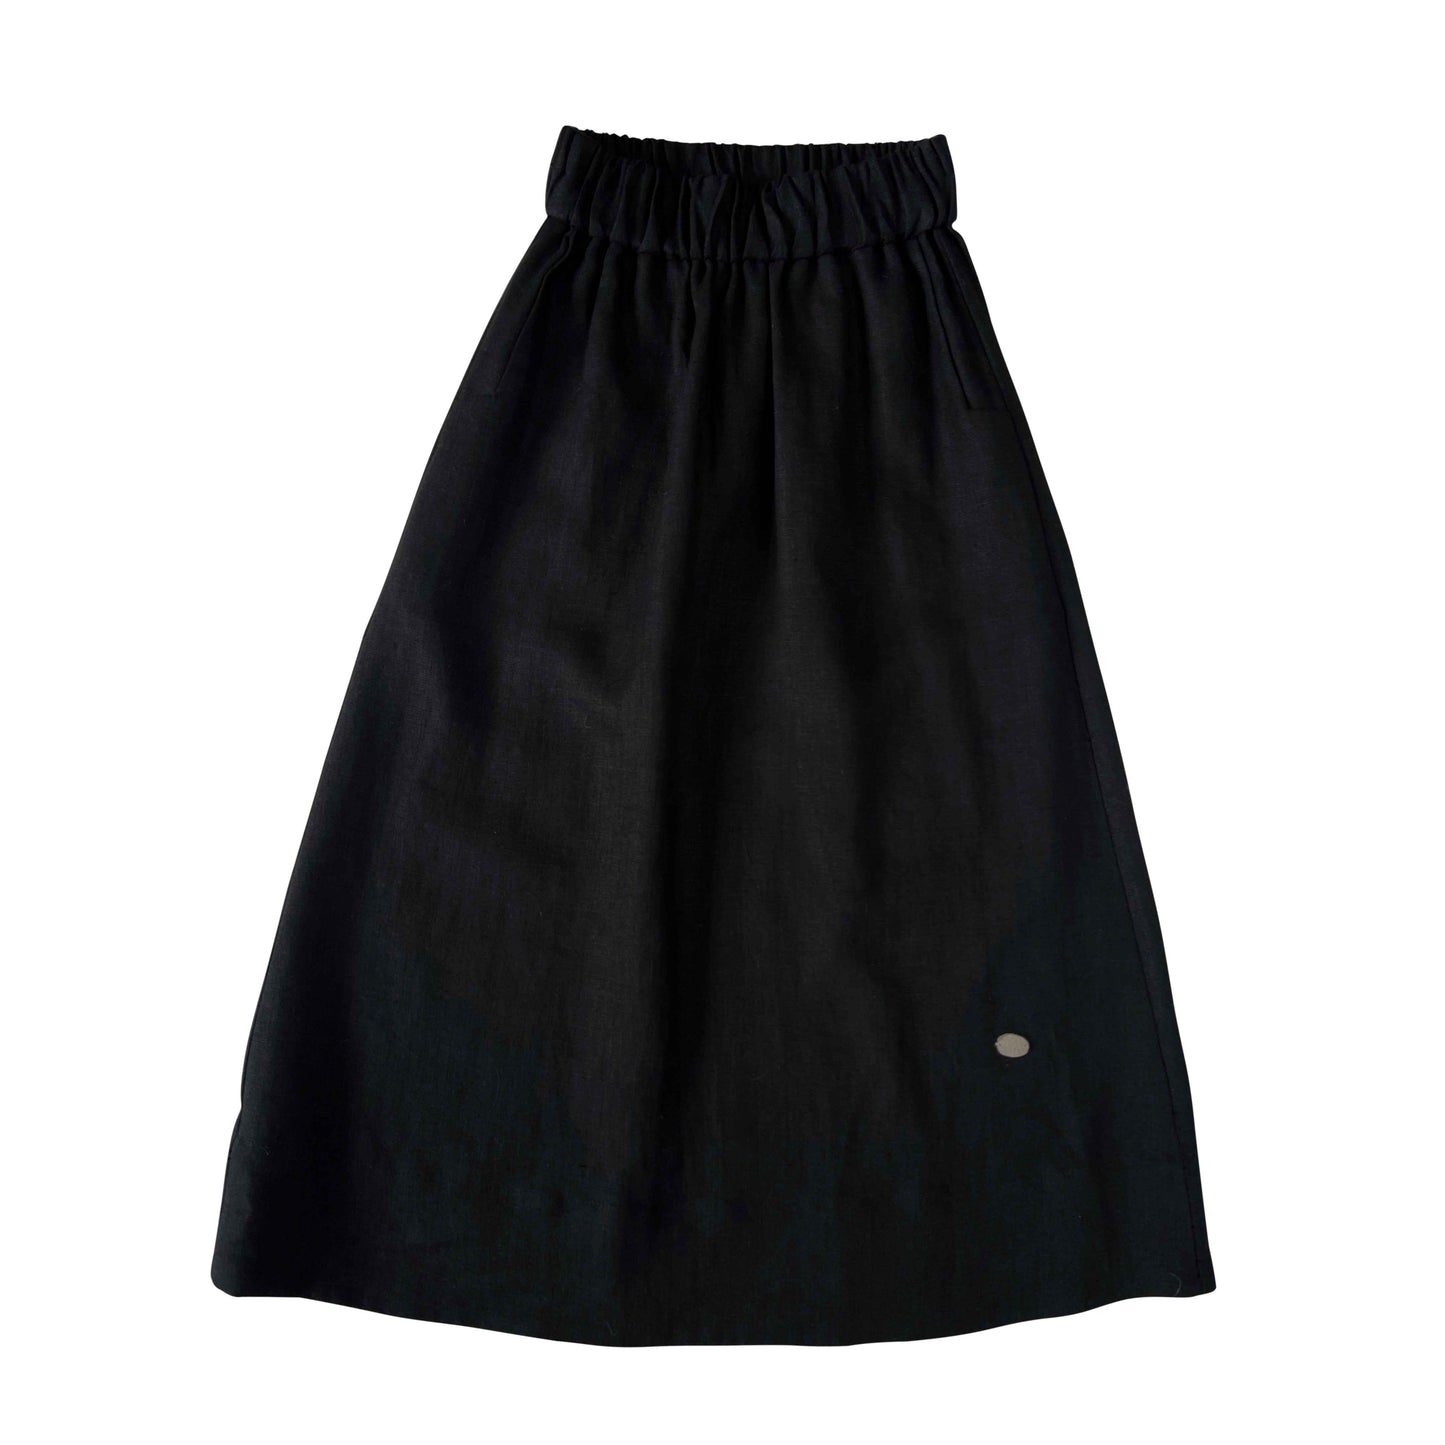 UPA MOLLY Skirt MADE TO ORDER